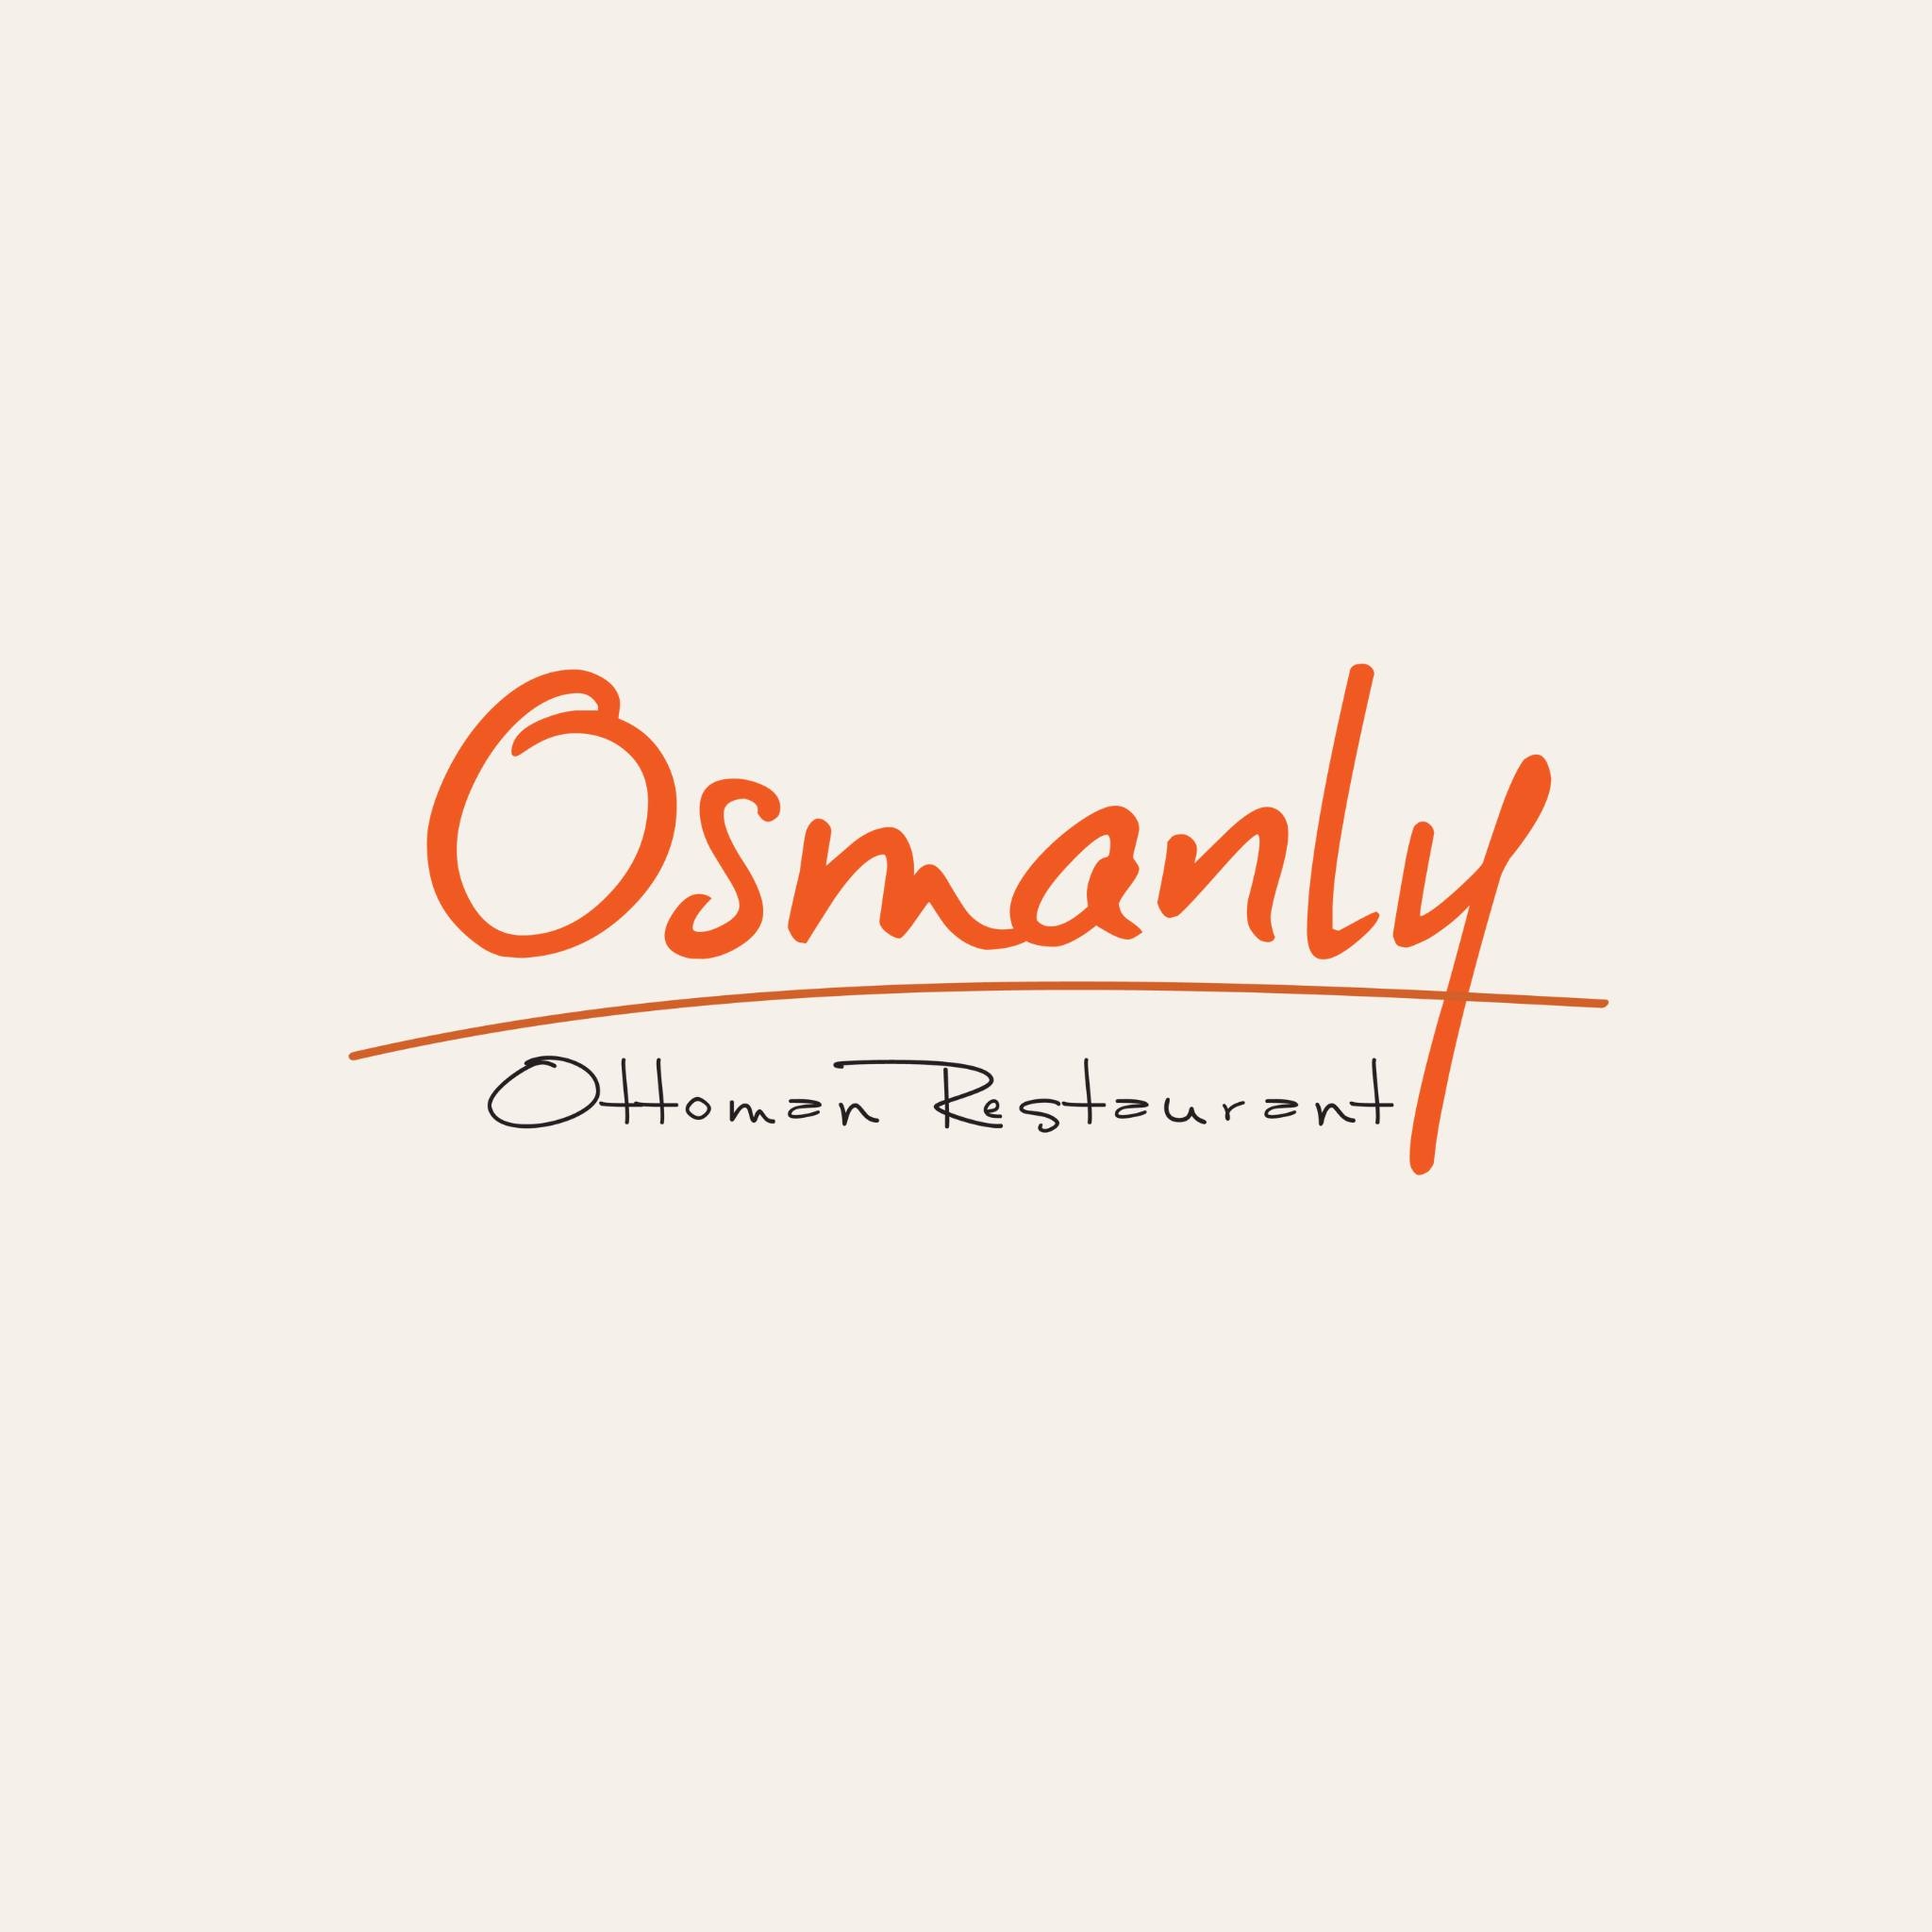 osmanly